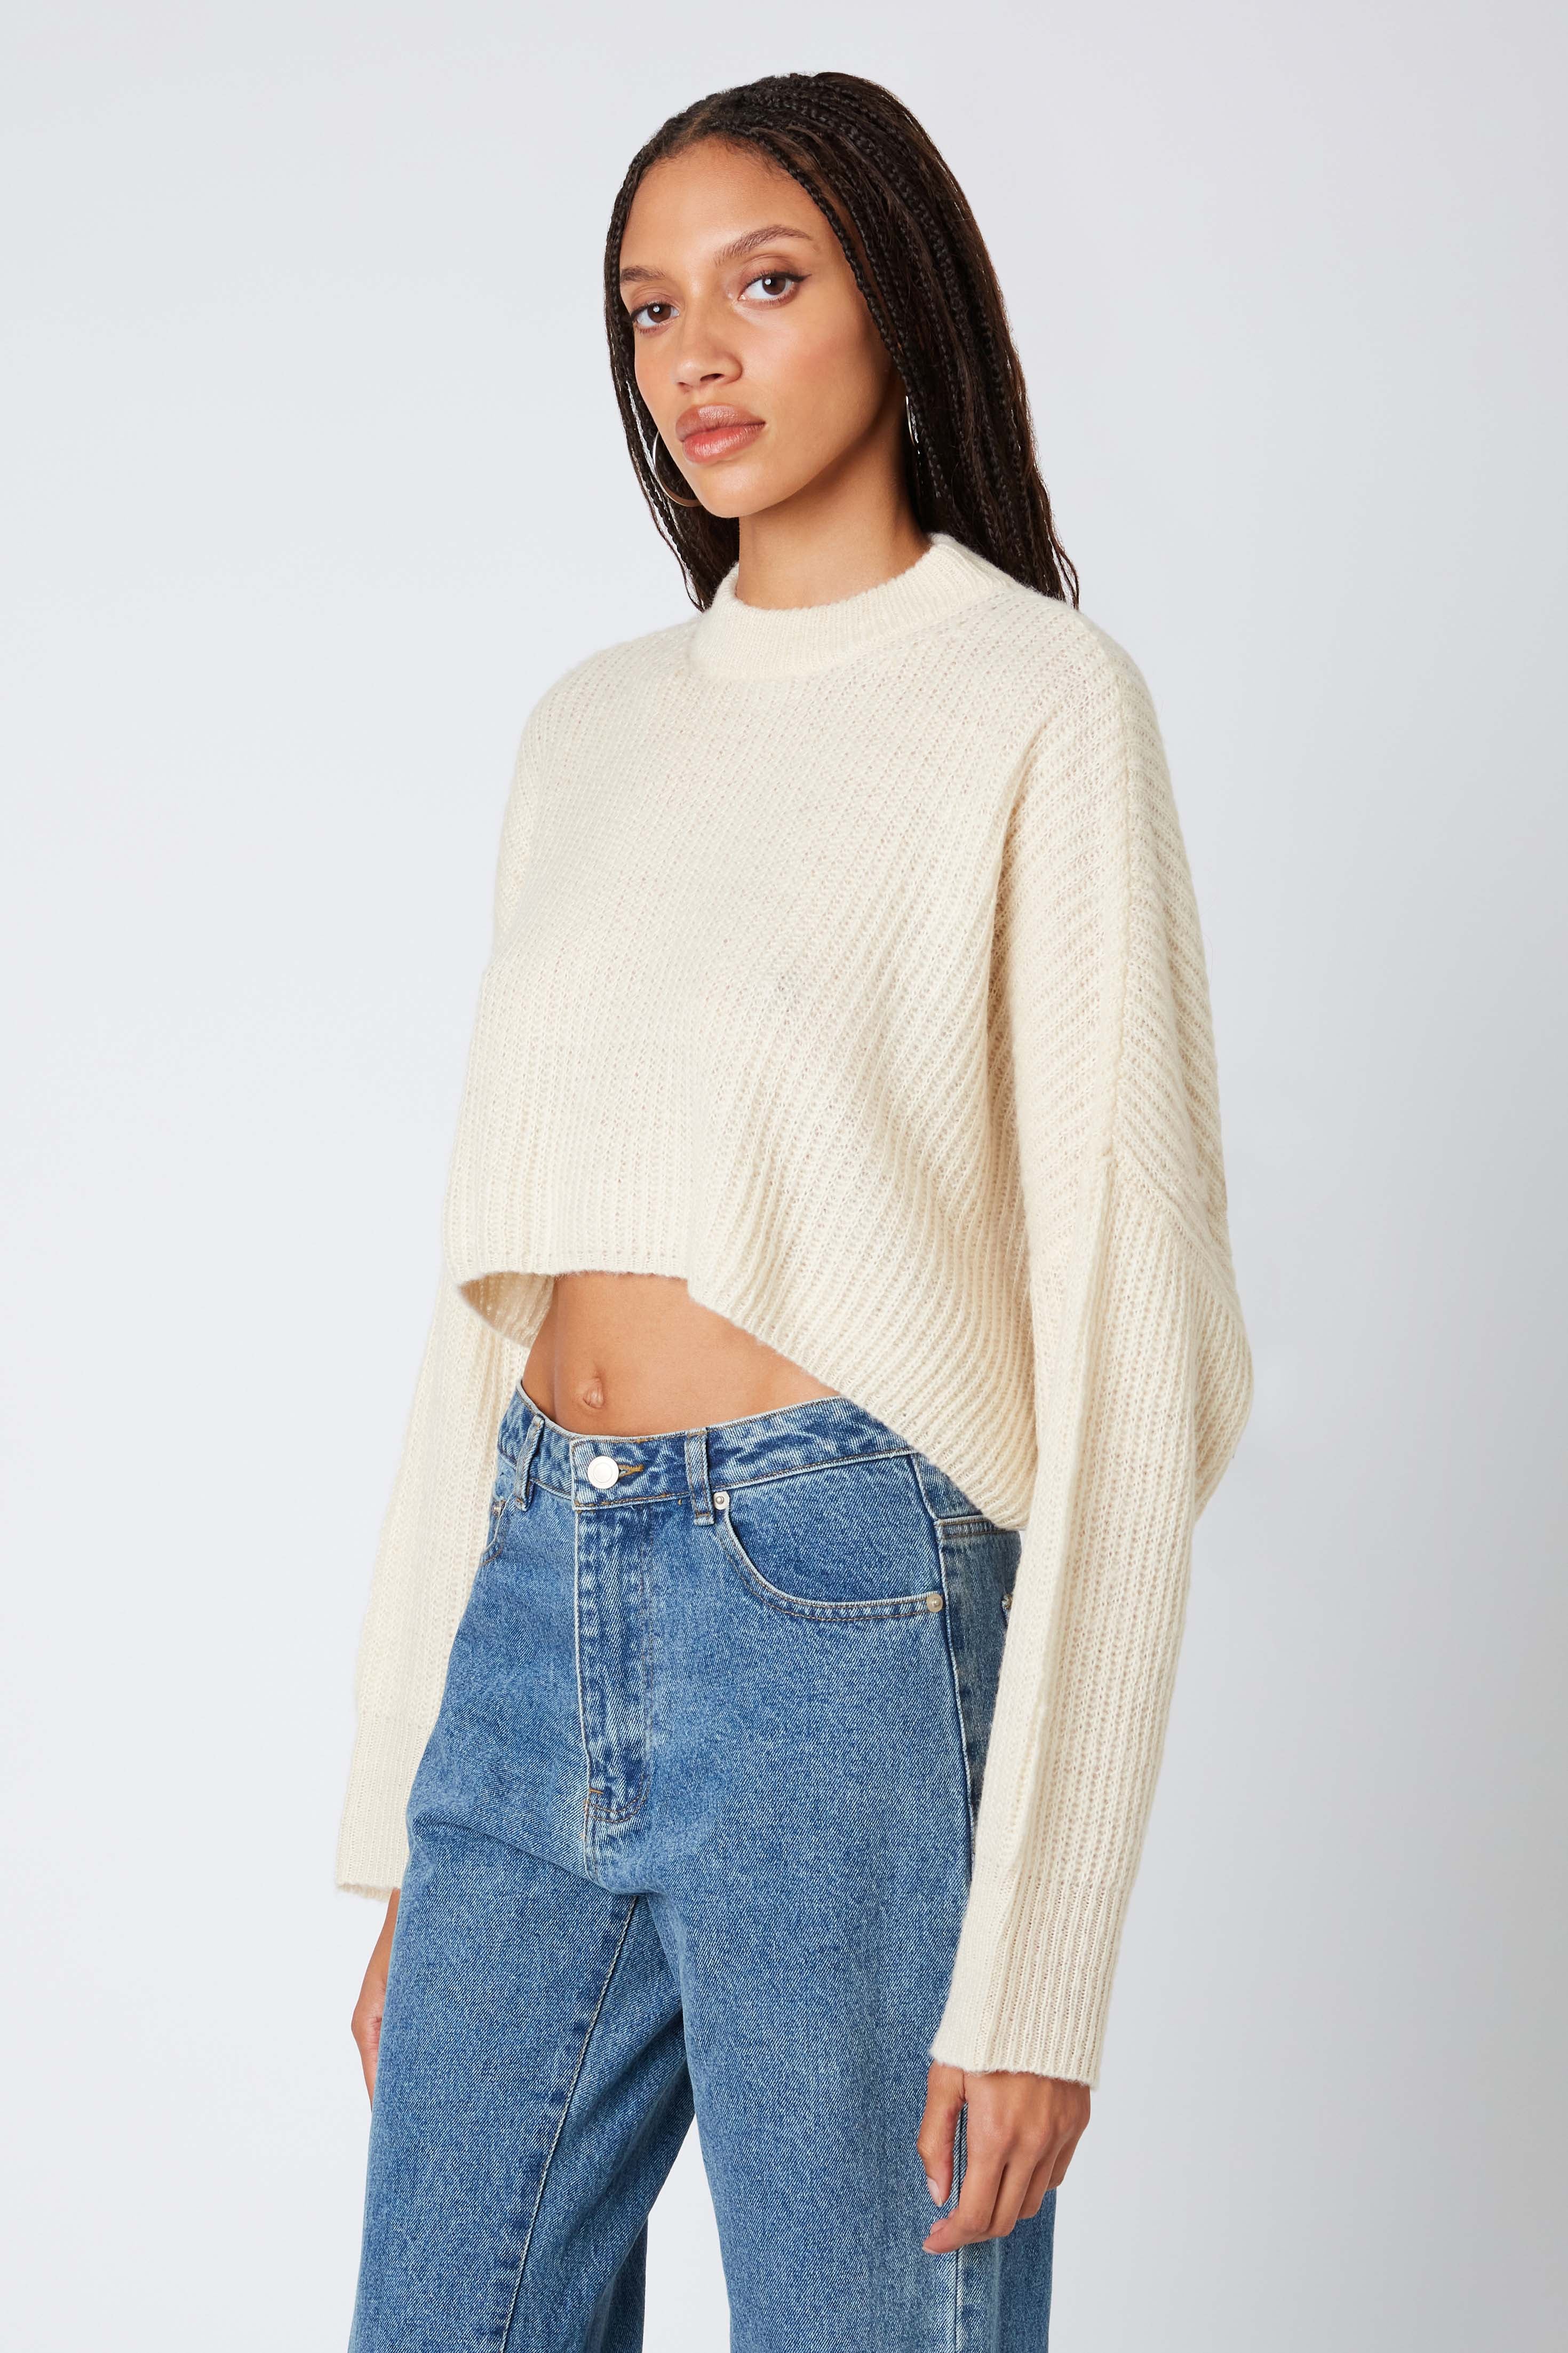 Cropped Mockneck Sweater in Ivory Side View